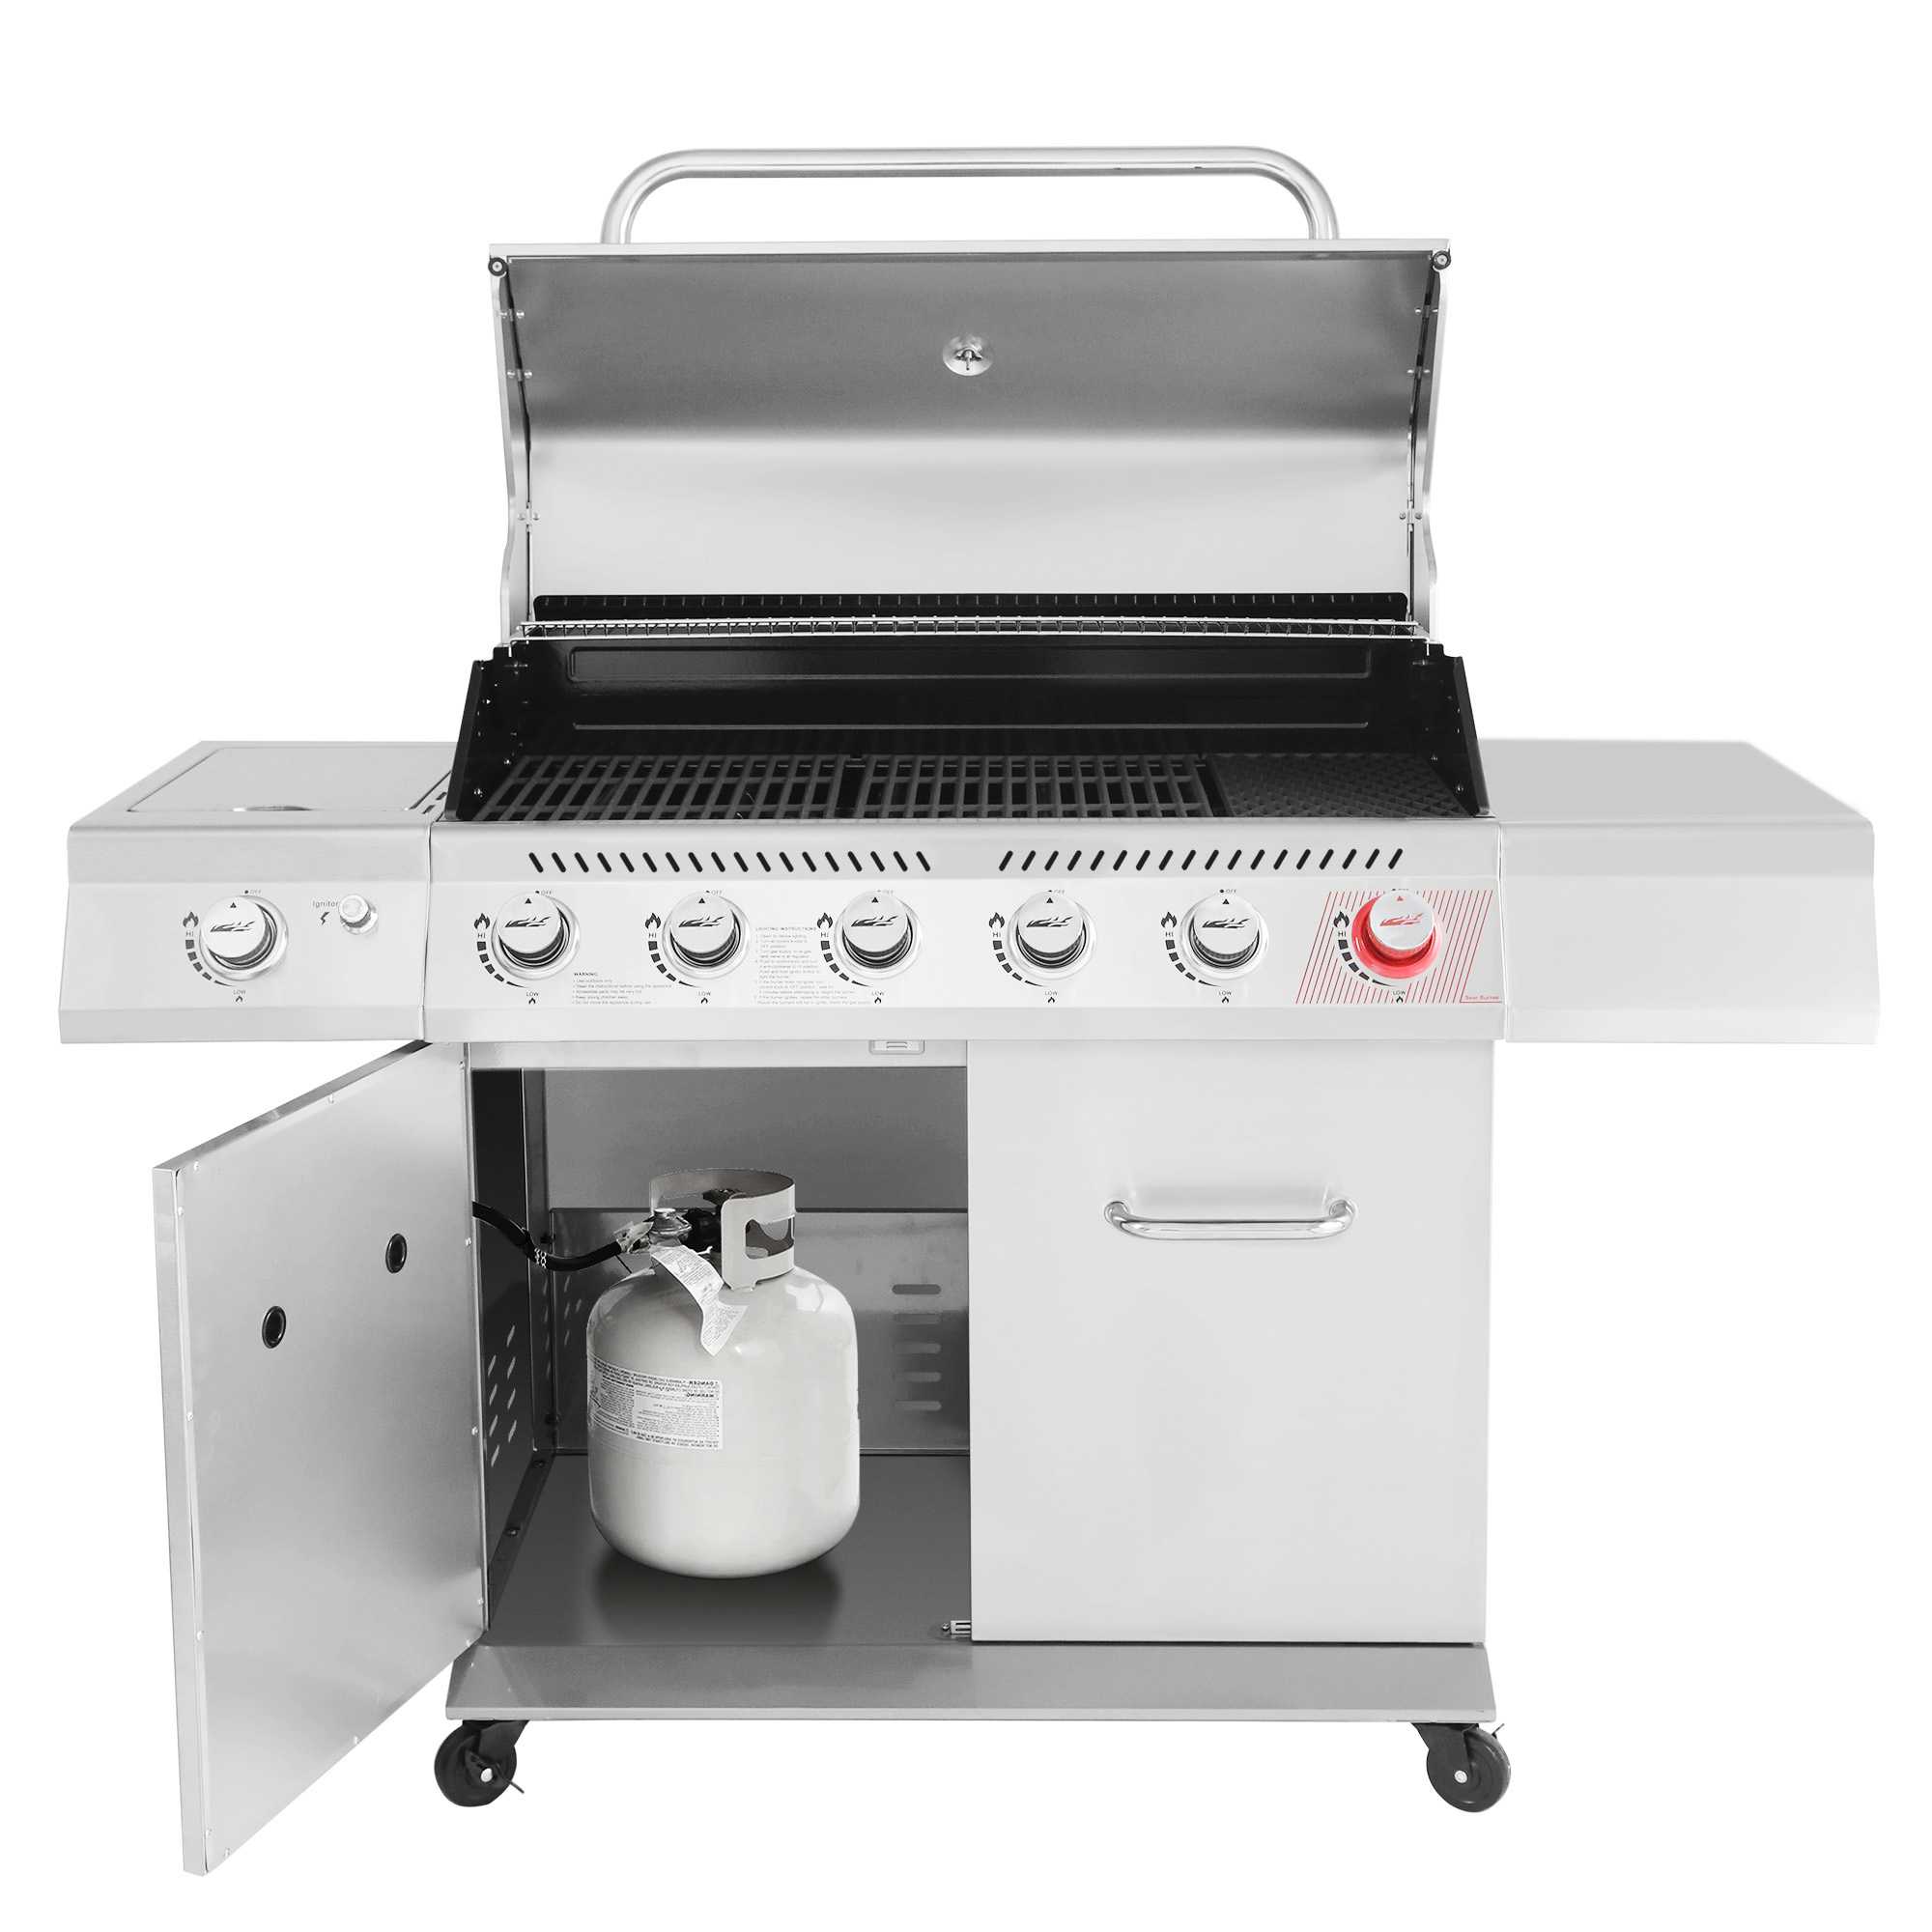 Royal Gourmet GA6402S Stainless Steel Gas Grill, Premier 6-Burner BBQ Grill with Sear Burner and Side Burner, 74,000 BTU, Cabinet Style, Outdoor Party Grill, Silver - image 3 of 9